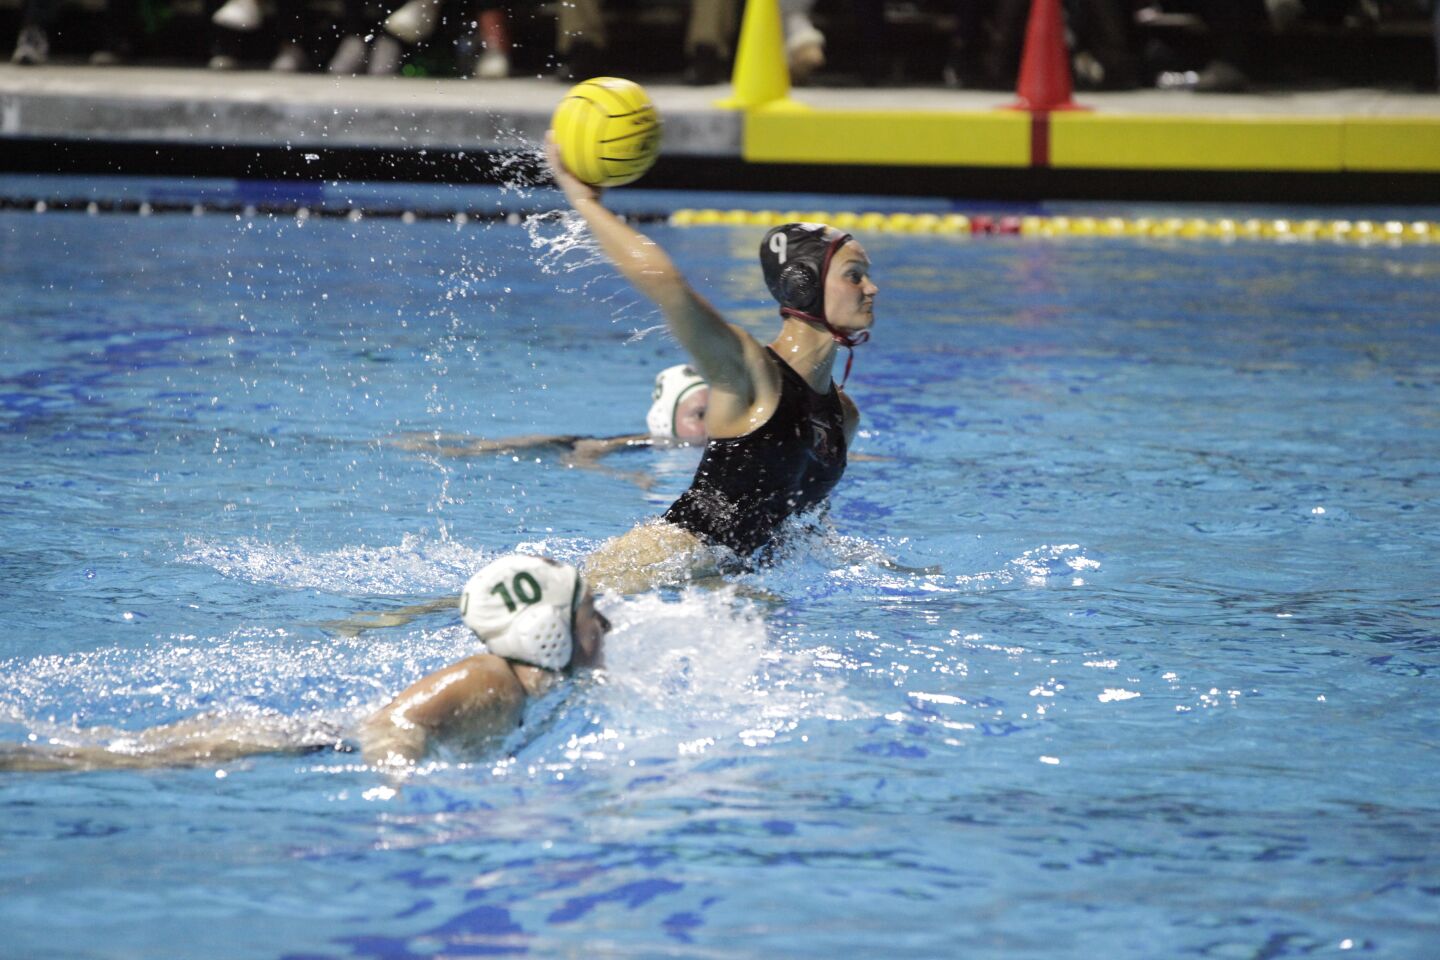 Bishop's Julia Bonaguidi plays in the Knights' 19-6 victory over Helix in the CIF San Diego Section Open Division title game.